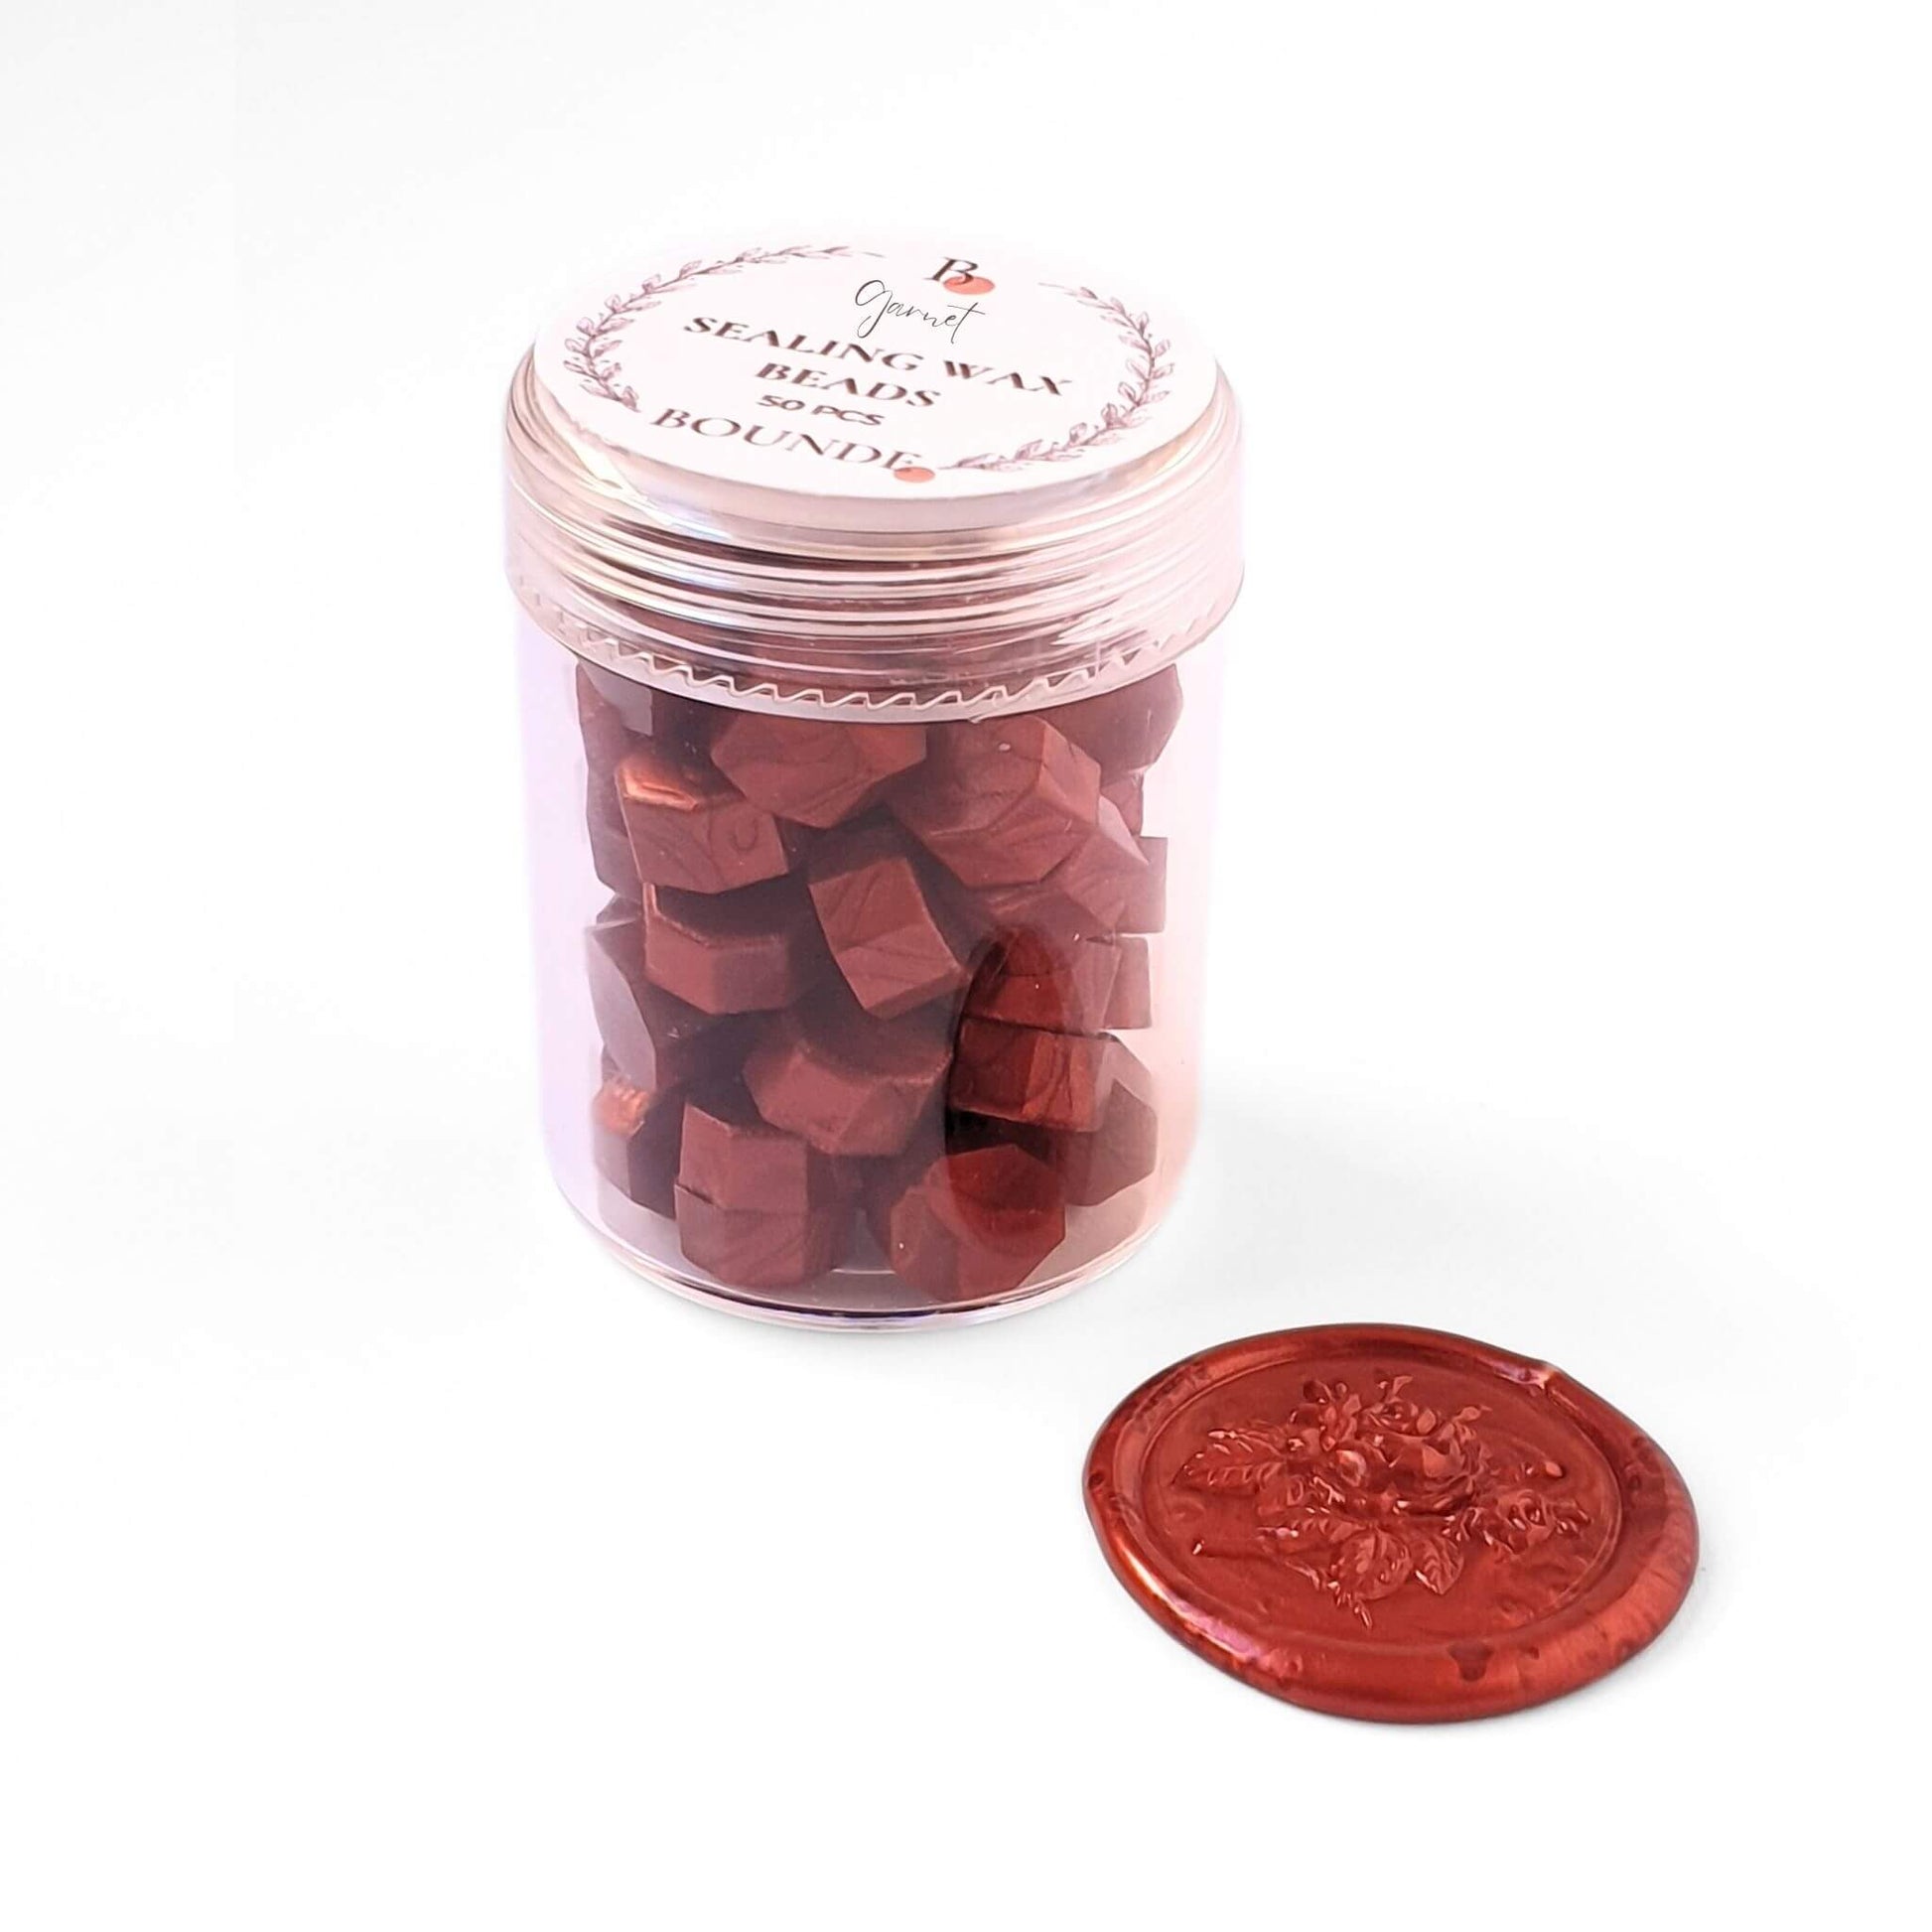 Garnet red sealing wax beads in jar with red wax seal next to it